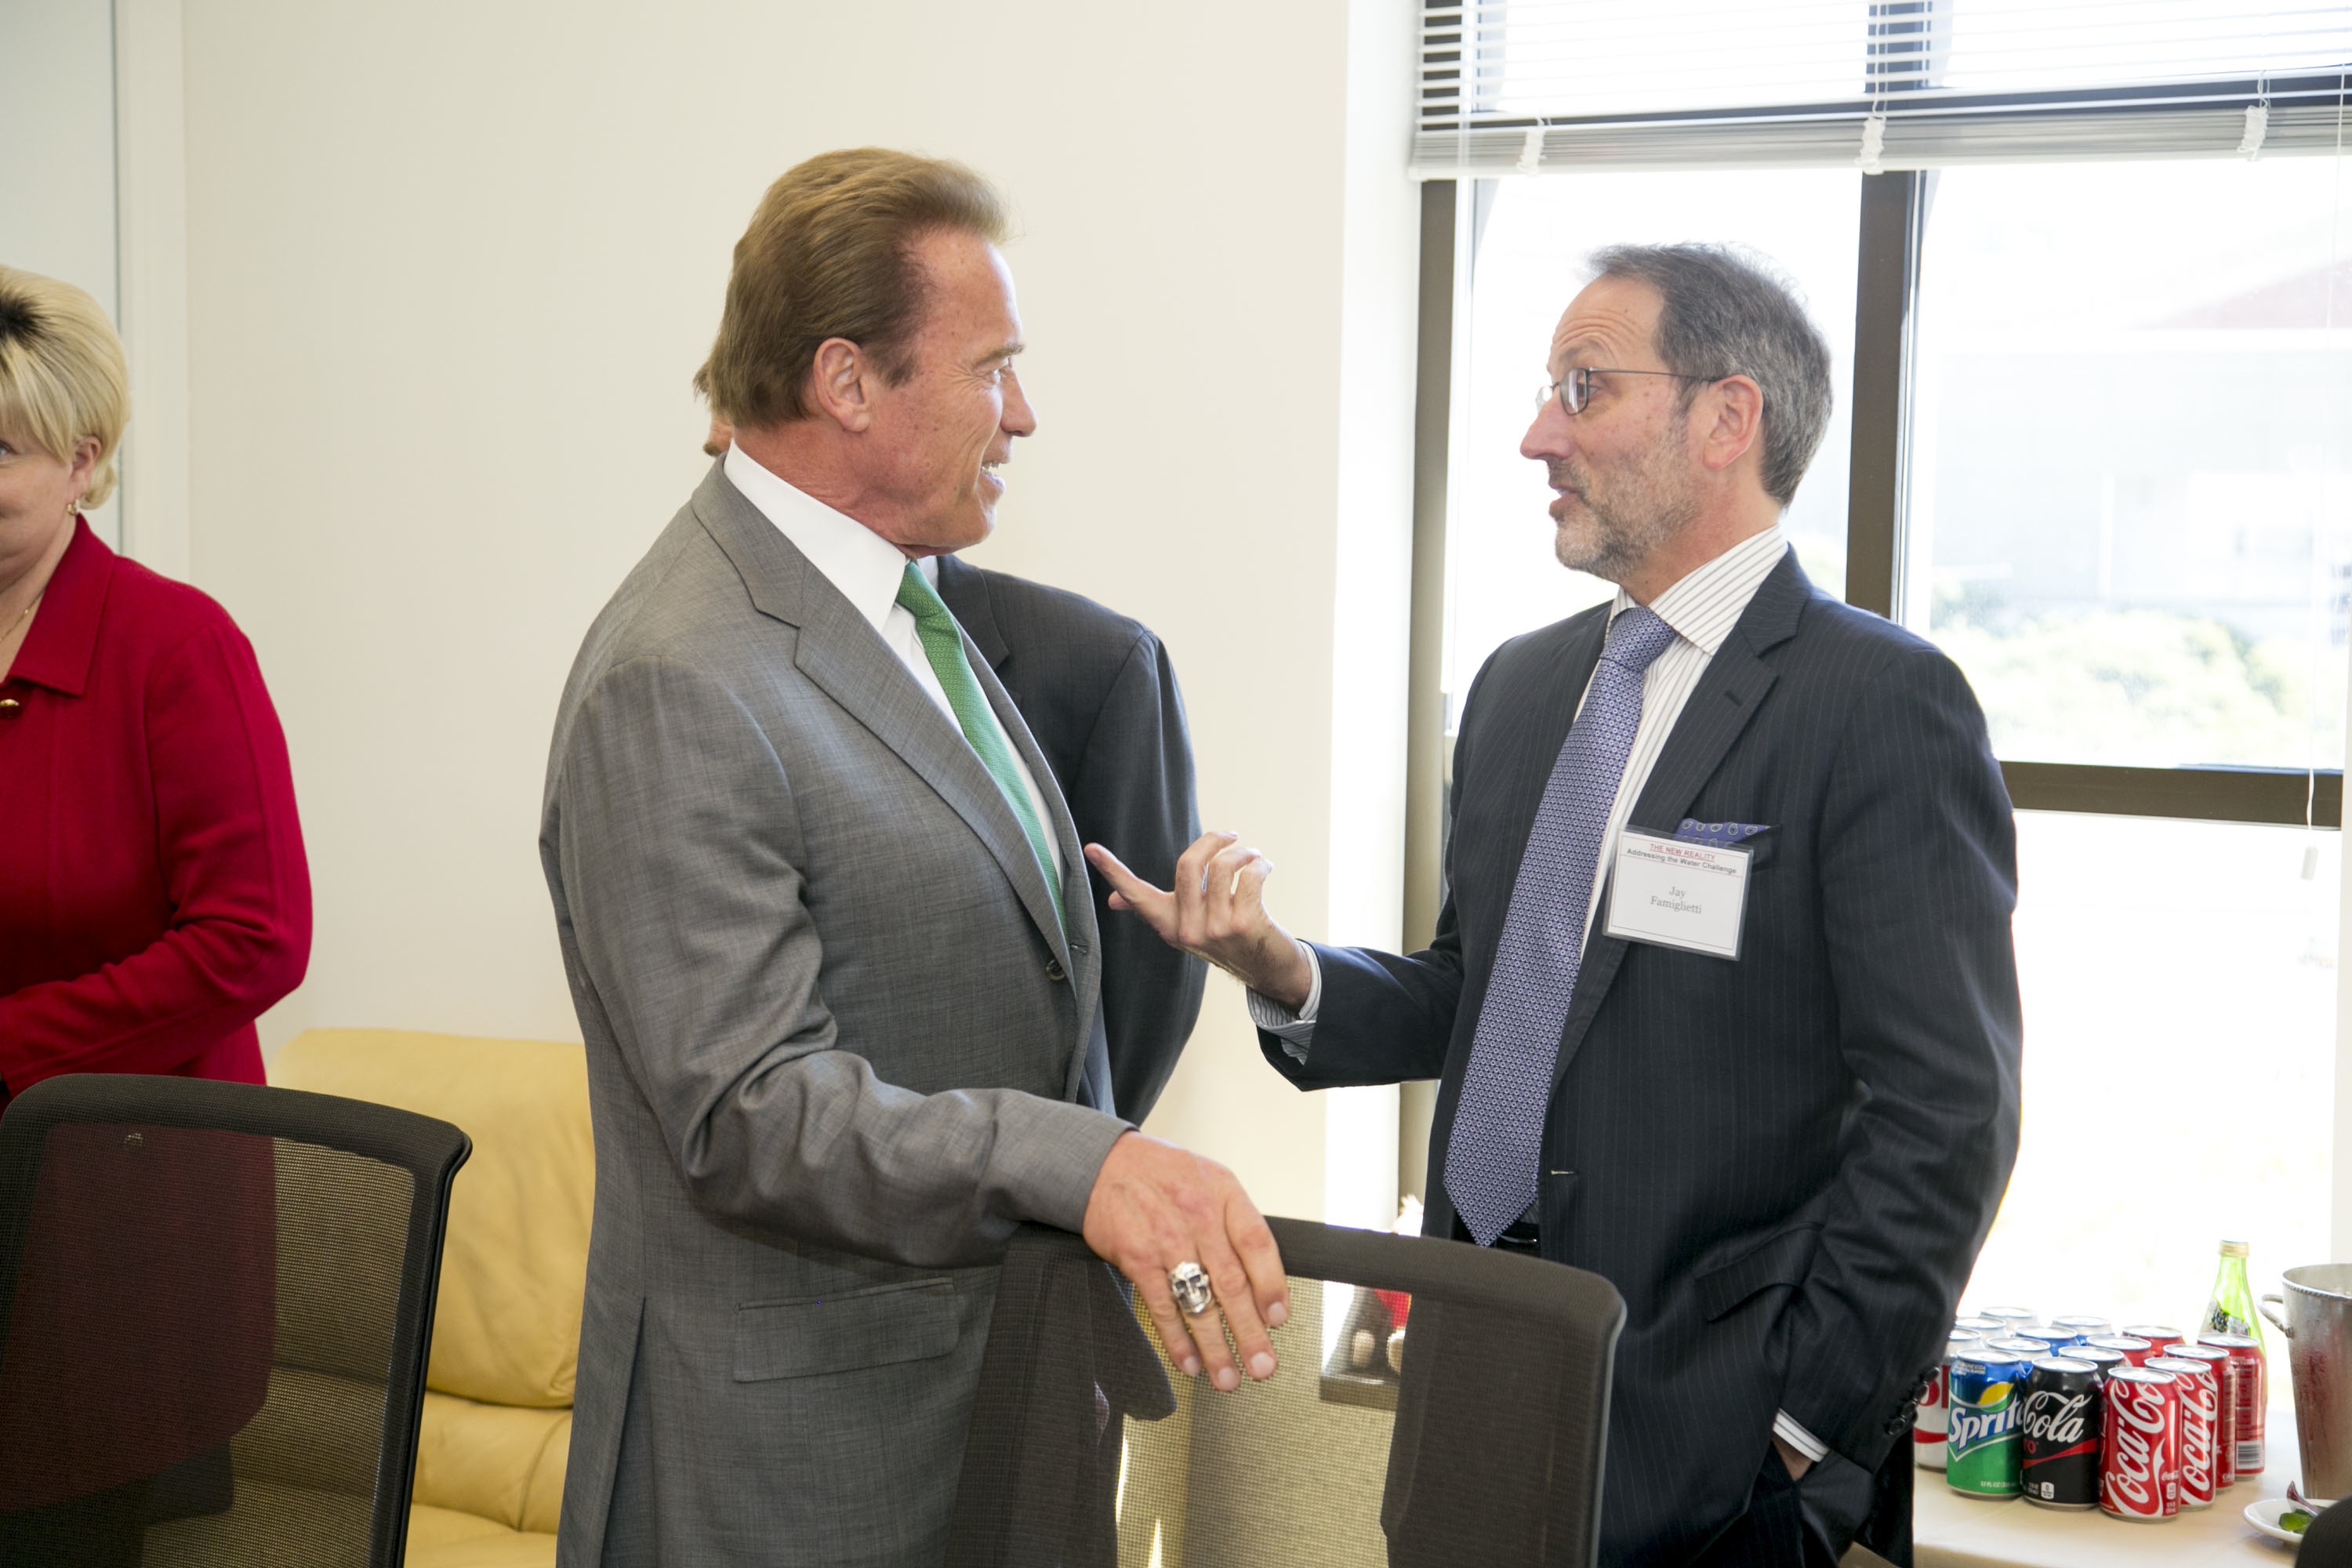 Jay Famiglietti with Governor Arnold Schwarzenegger at USC water forum, May 7, 2015.